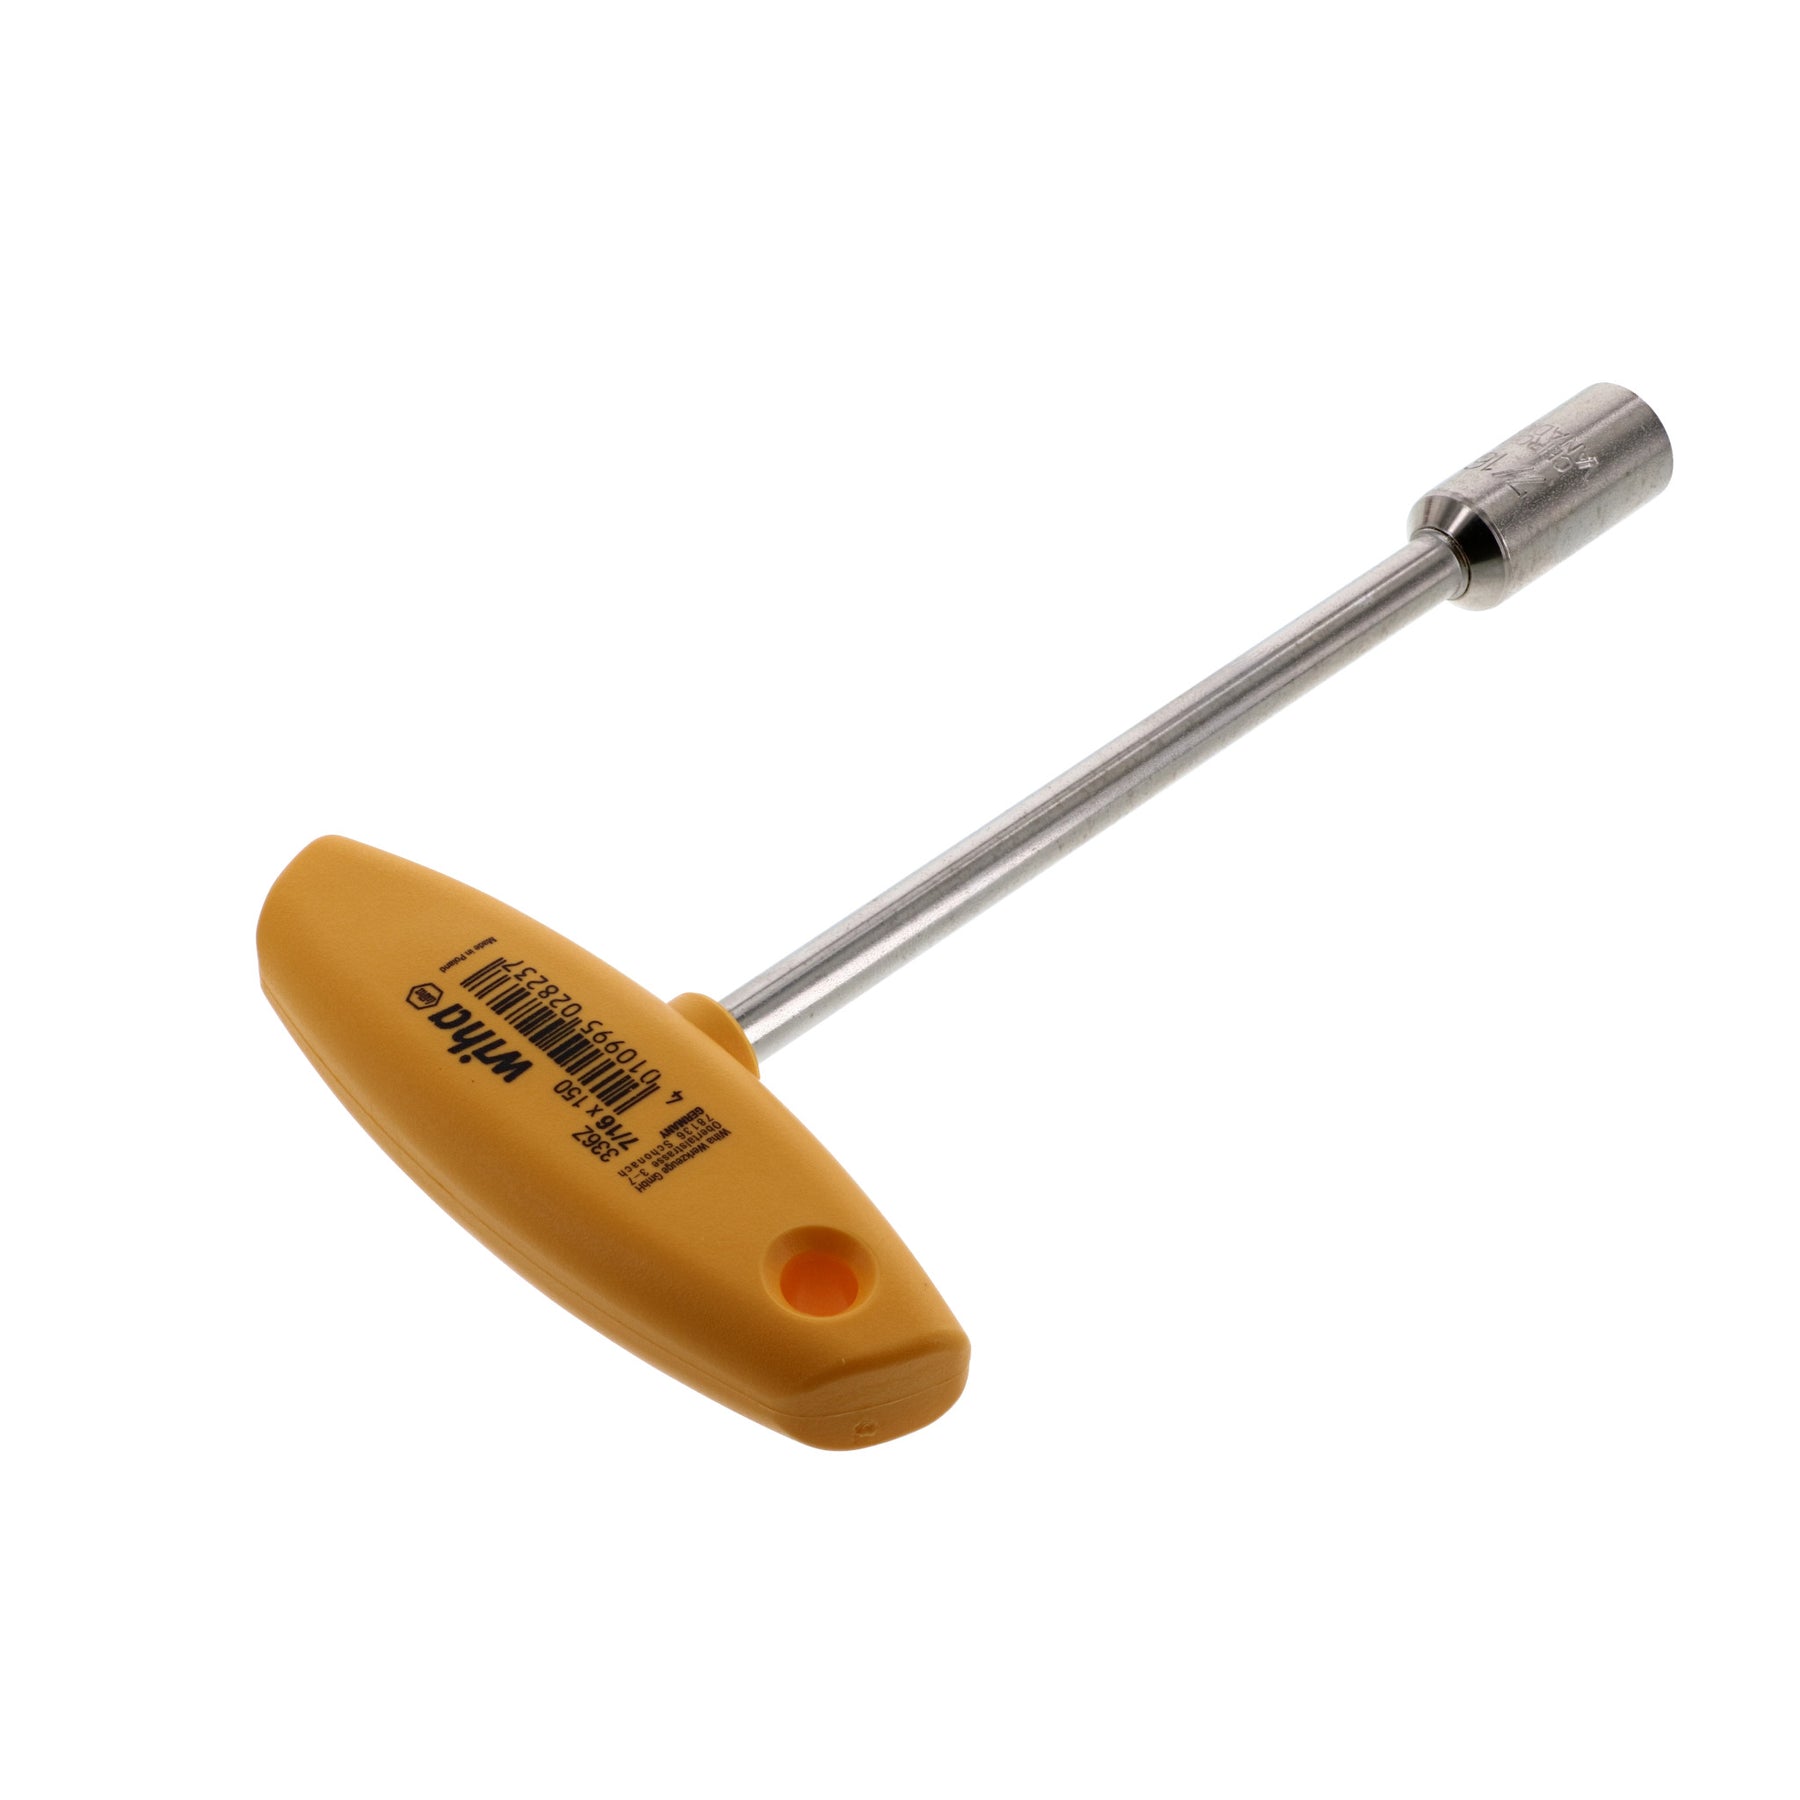 Classic Grip T-Handle Nut Driver 7/16"